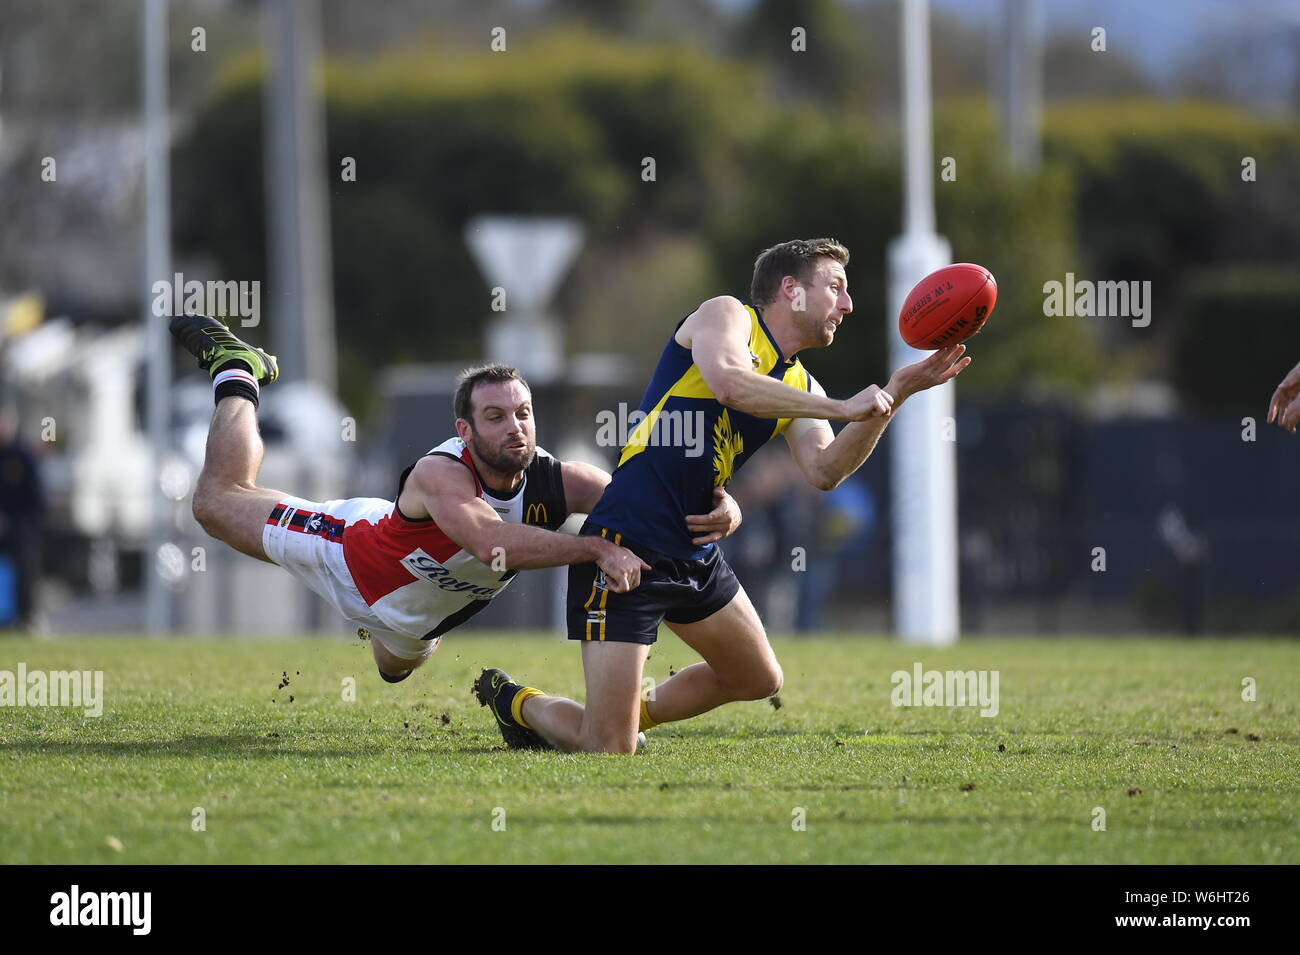 Australian Rules Football High Resolution Stock Photography and Images -  Alamy